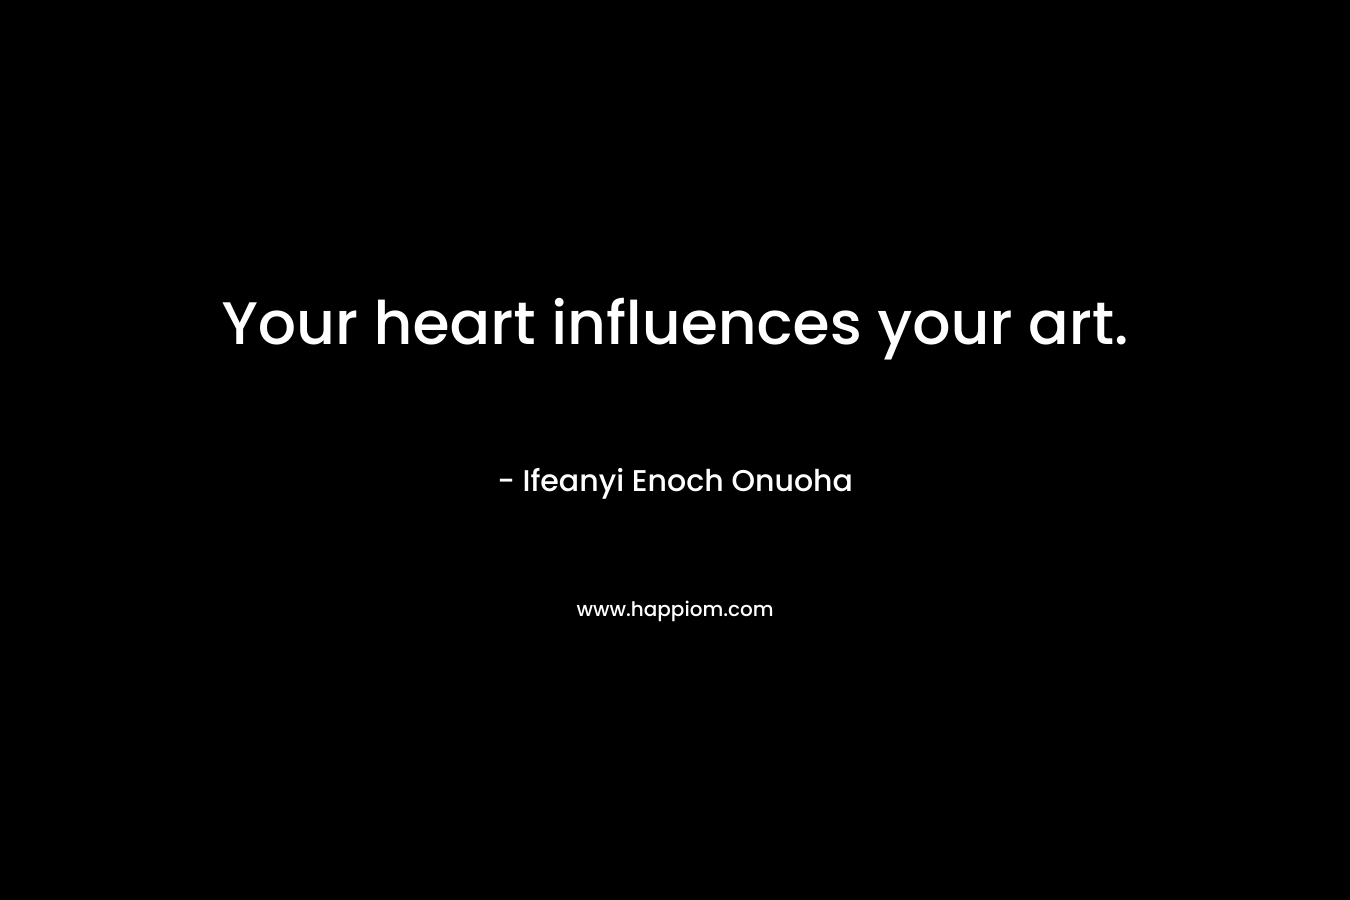 Your heart influences your art. – Ifeanyi Enoch Onuoha